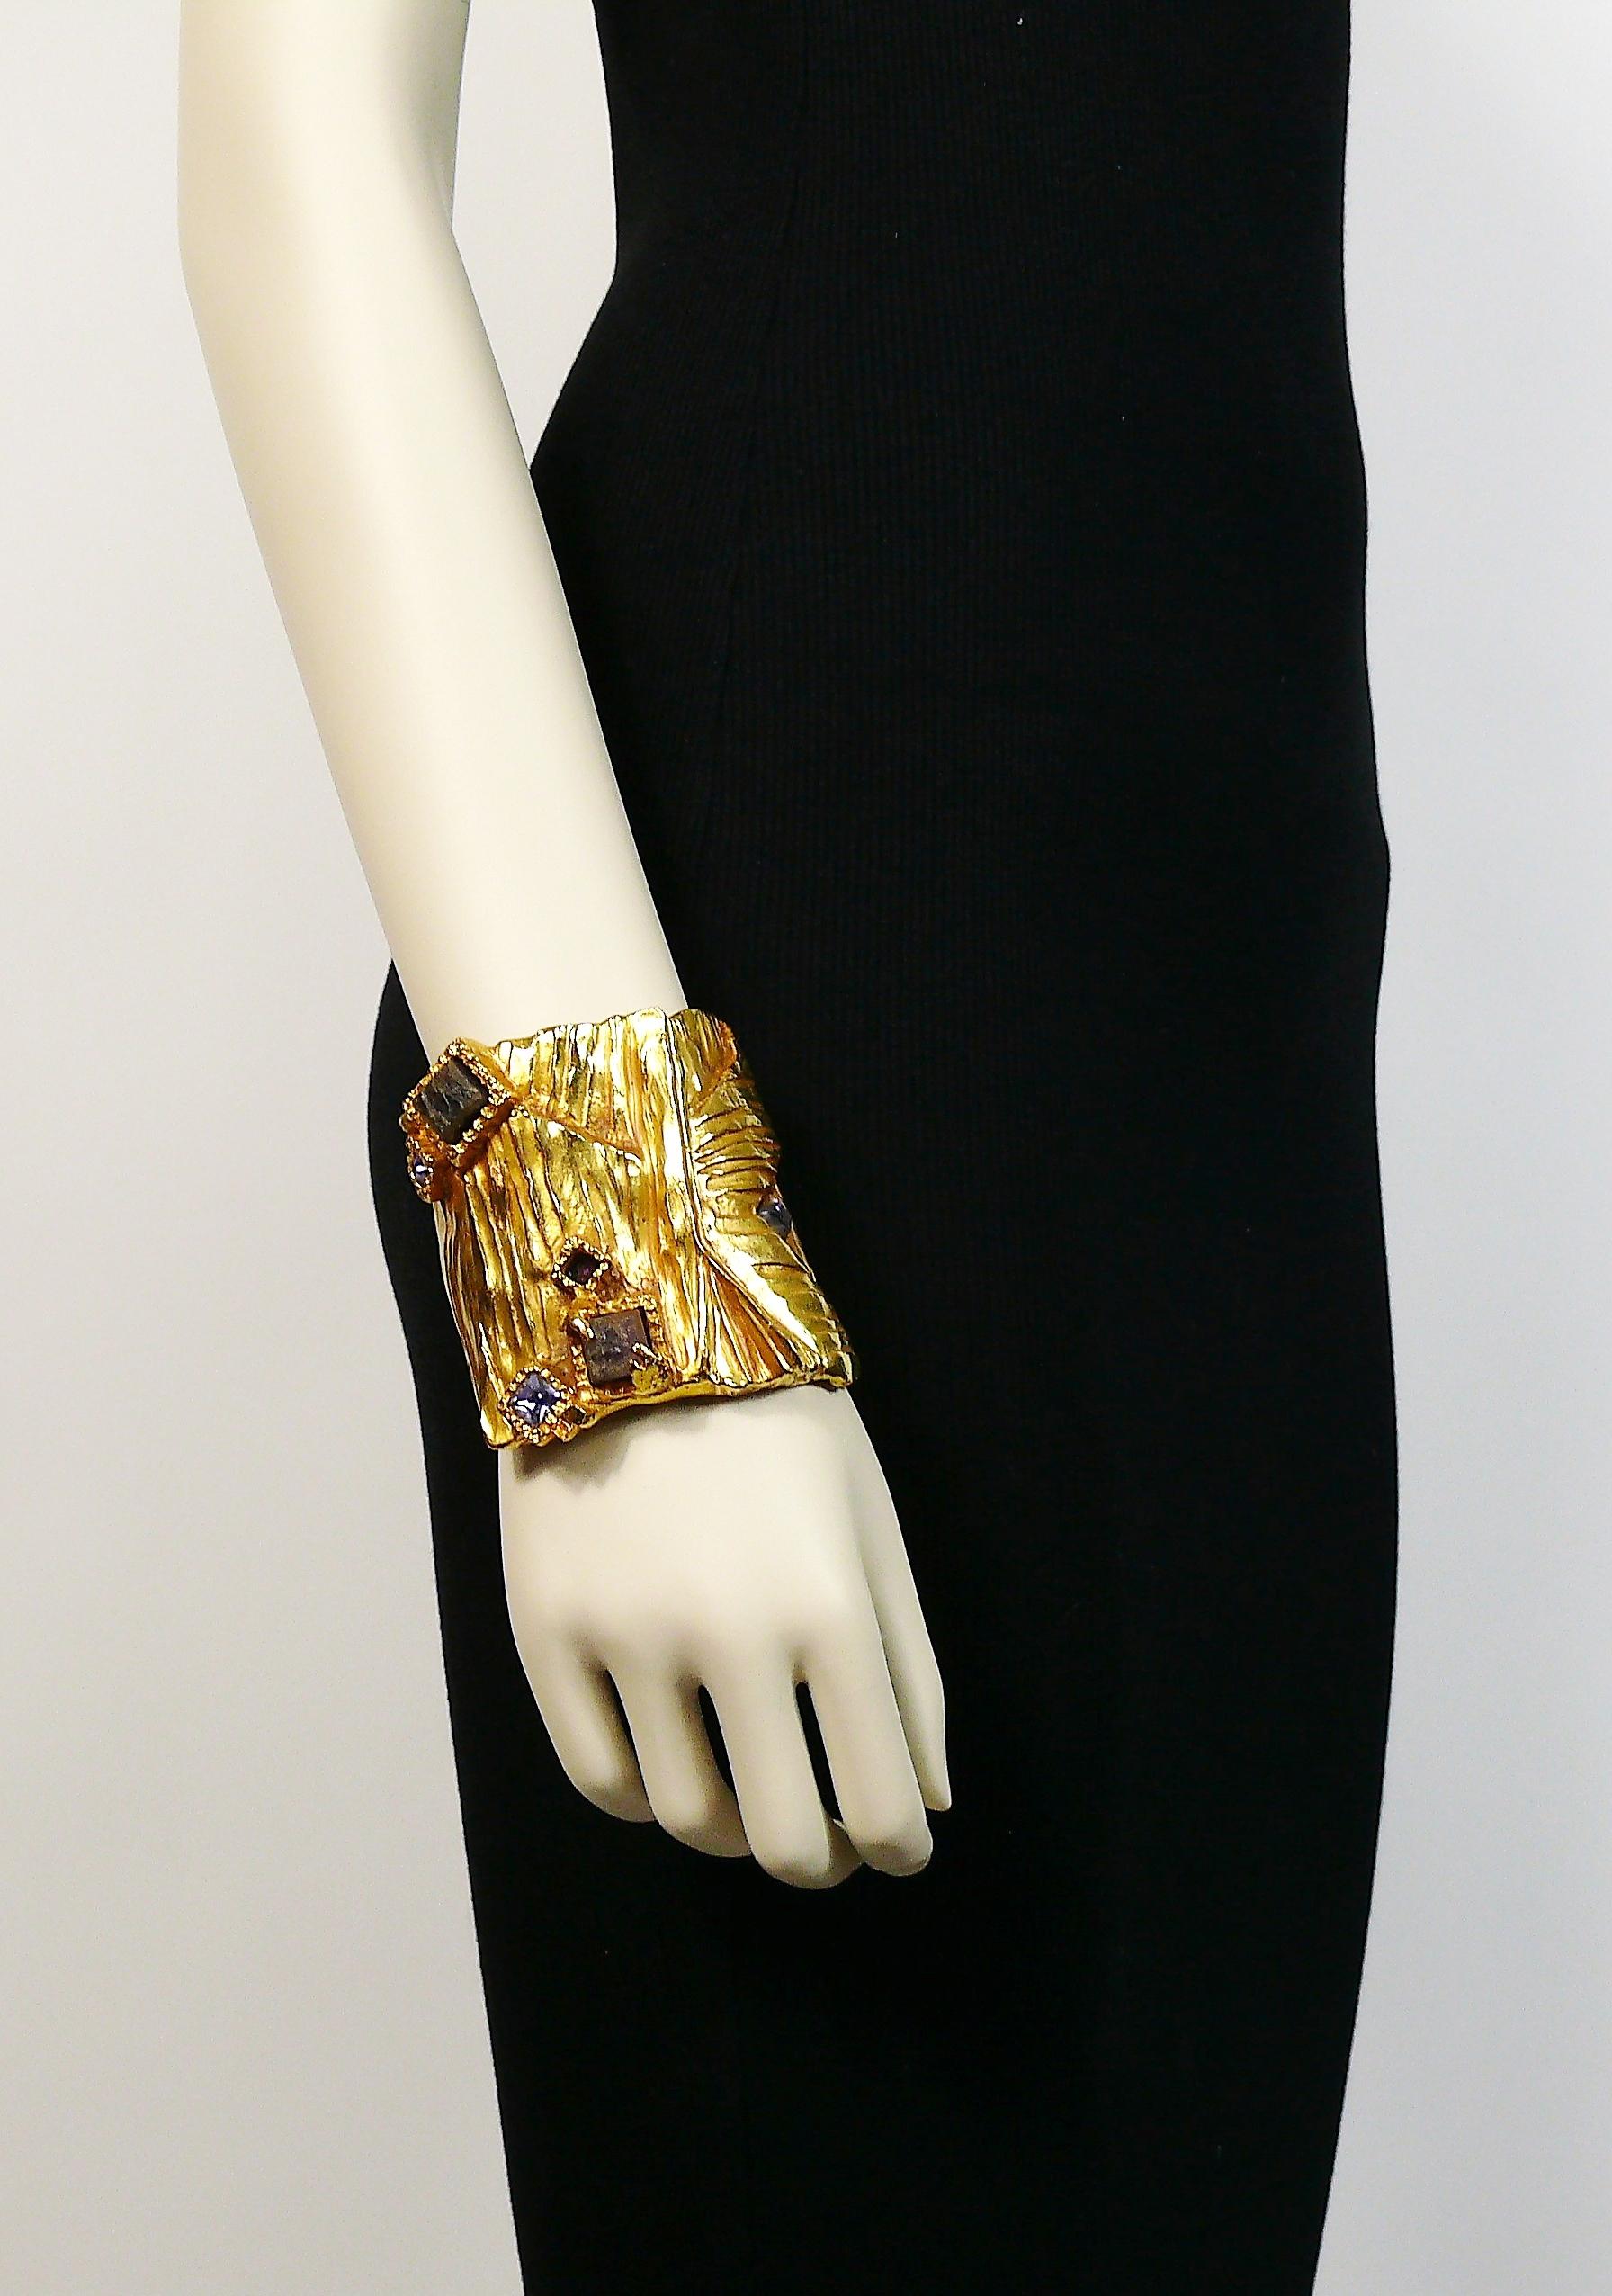 YVES SAINT LAURENT massive ARTY textured gold tone cuff bracelet embellished with hard stones, crystal and enamel. Stylized Y initial.

Embossed YVES SAINT LAURENT.

Has weight on it (approx. 300 grams).

Indicative measurements : inner max. width